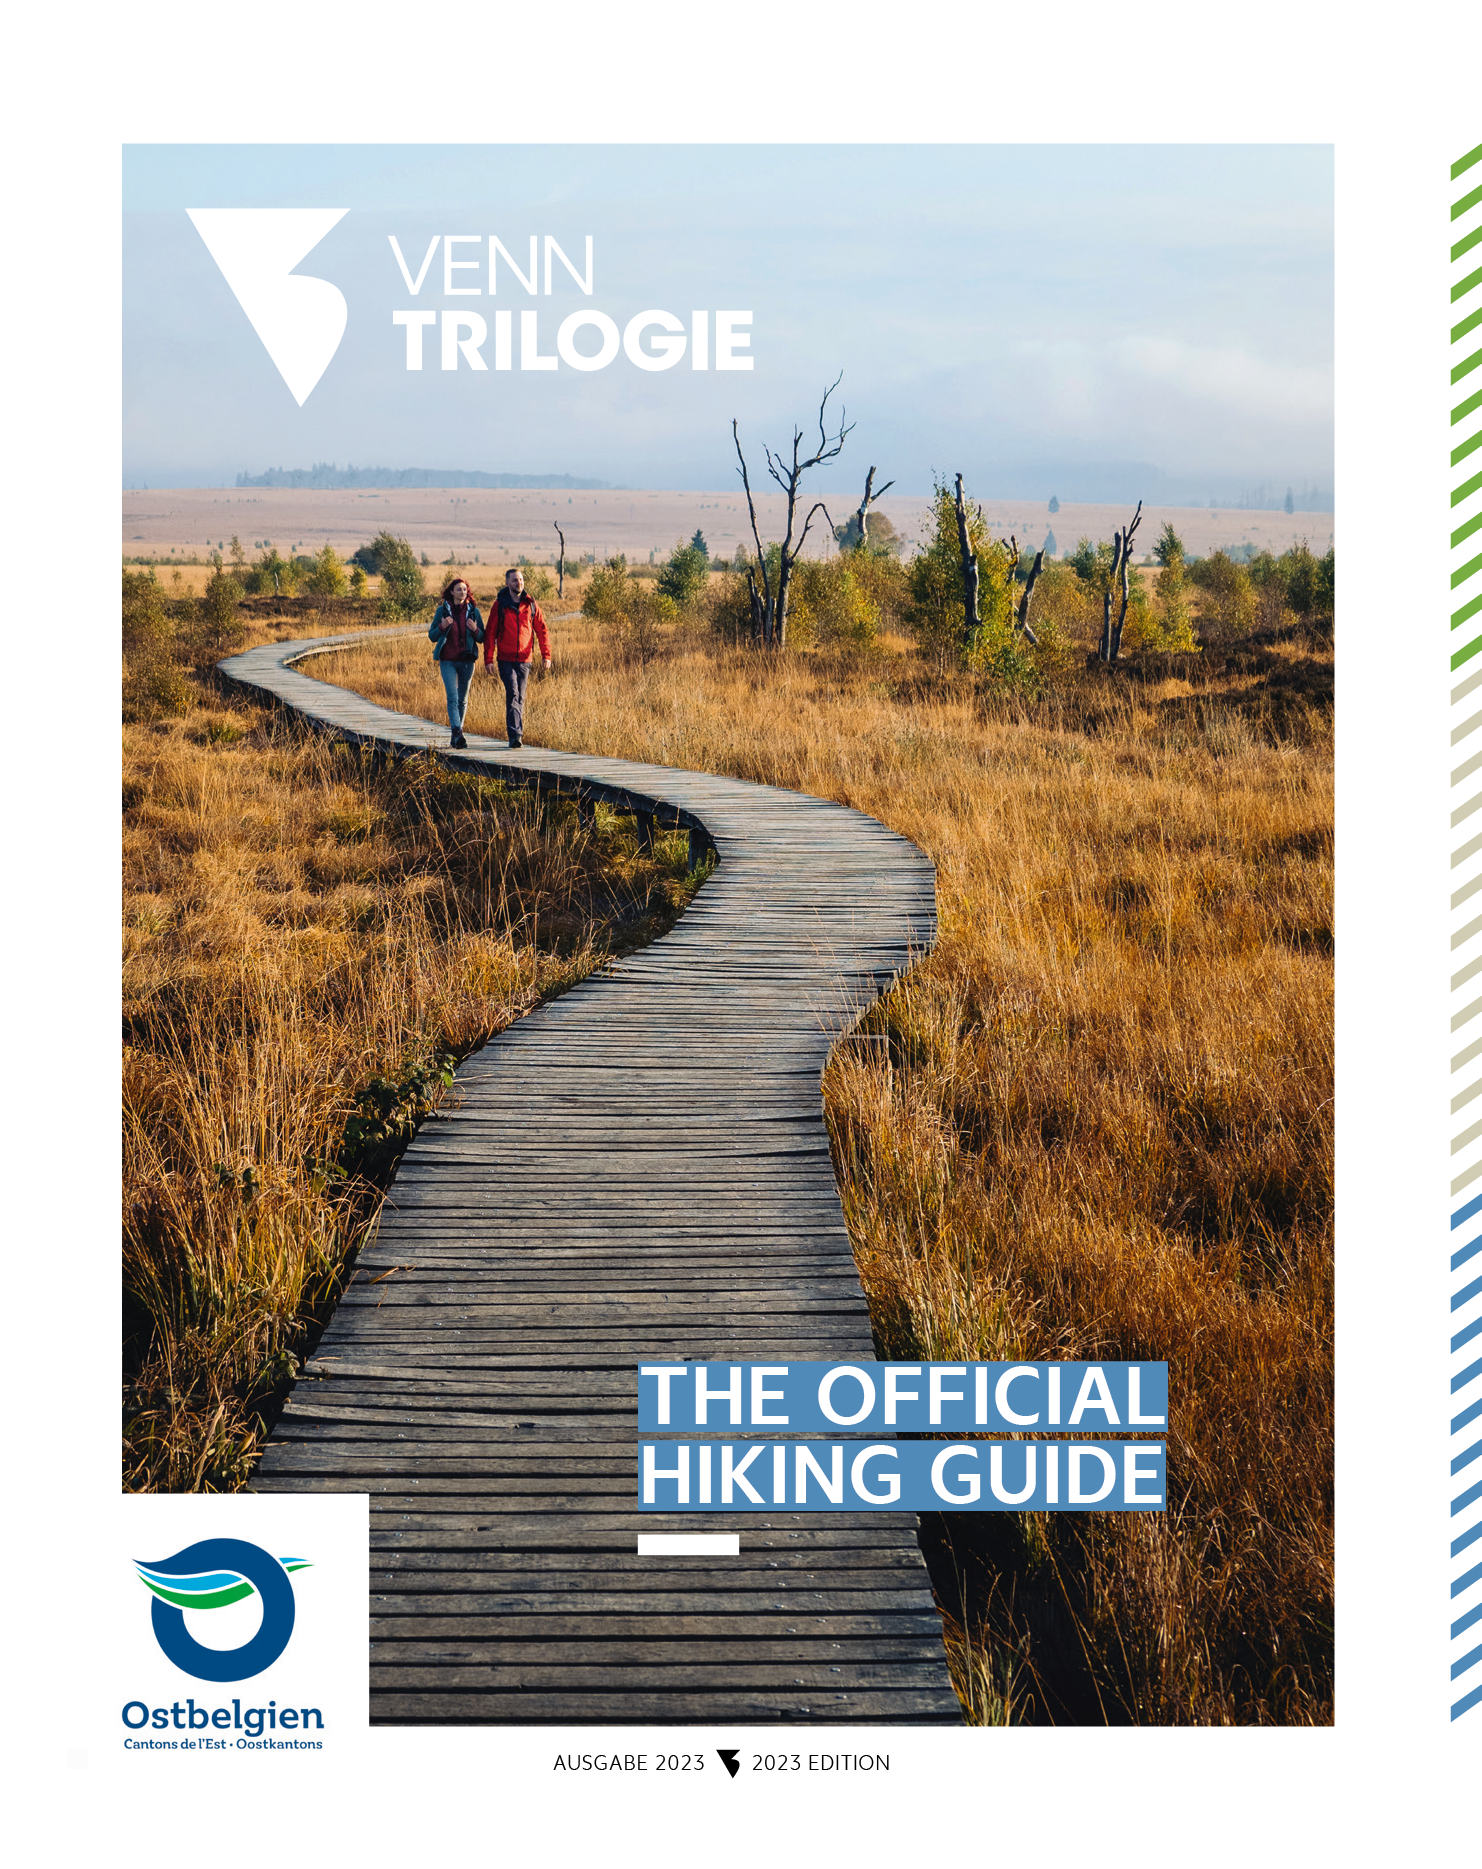 VENNTRILOGIE - The official hiking guide